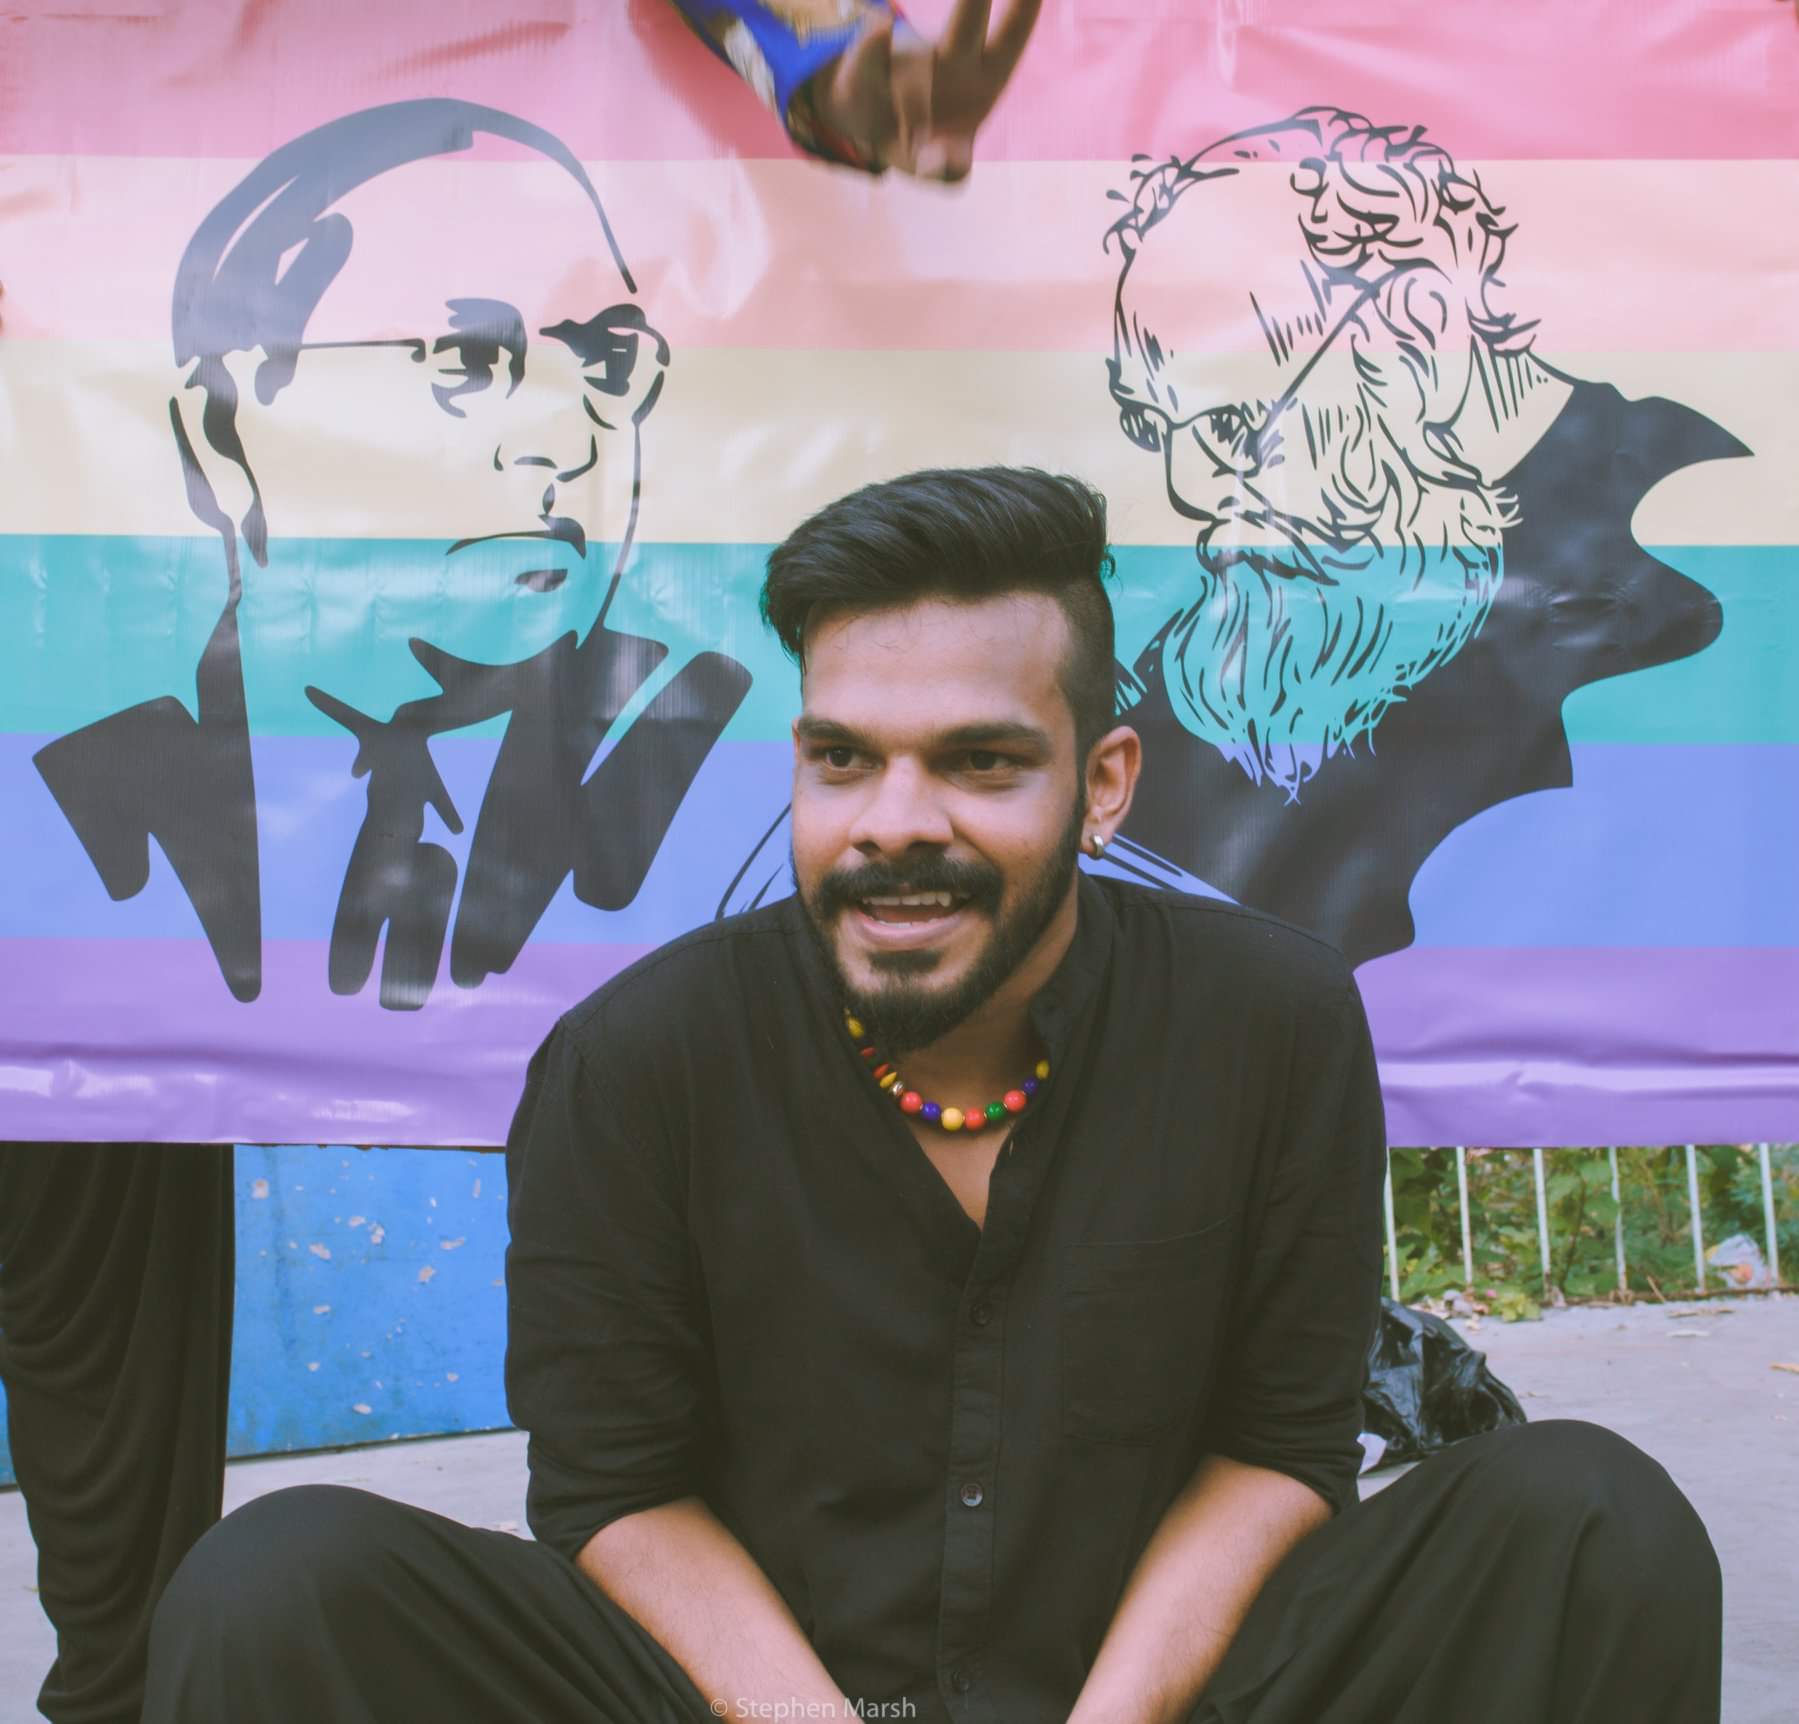 “For the first time, the rights of LGBTQIA are being spoken of in electoral politics”